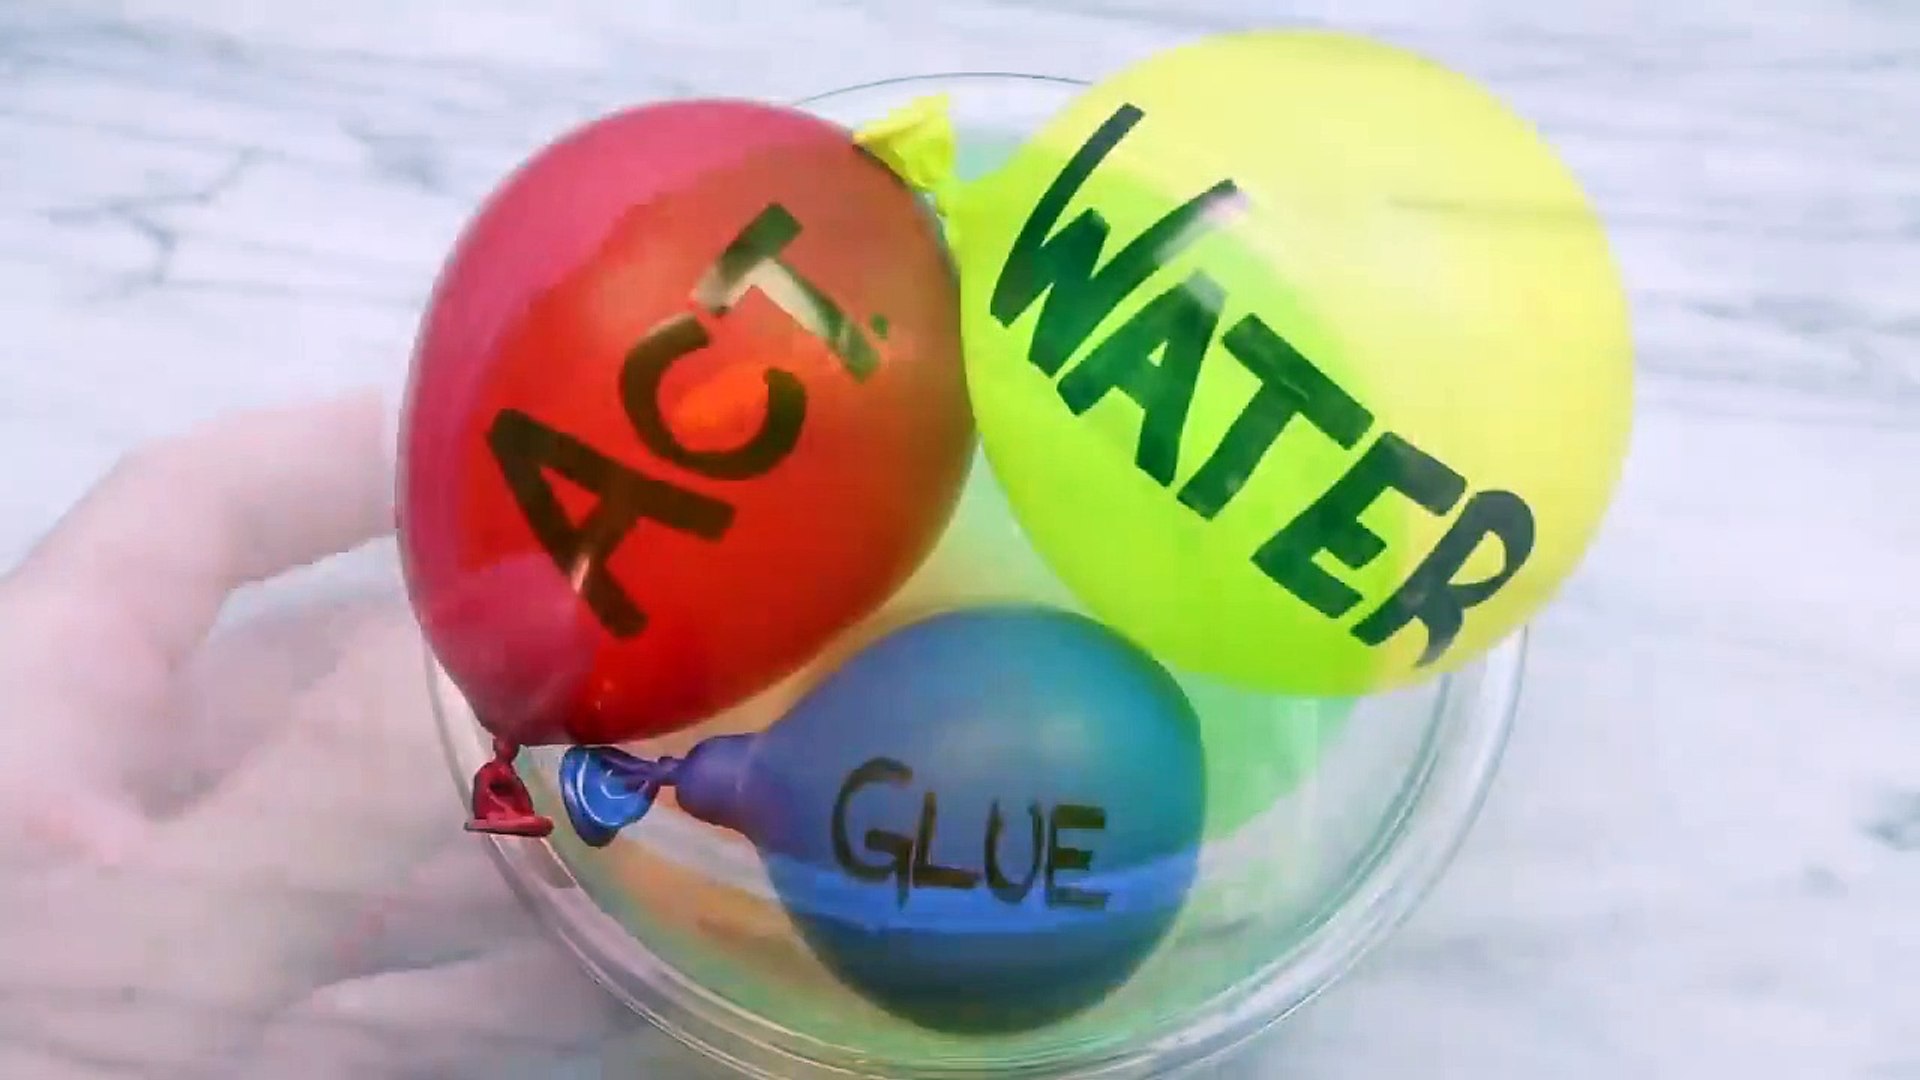 MAKING SLIME WITH BALLOON ! SATISFYING VIDEOS #4488 